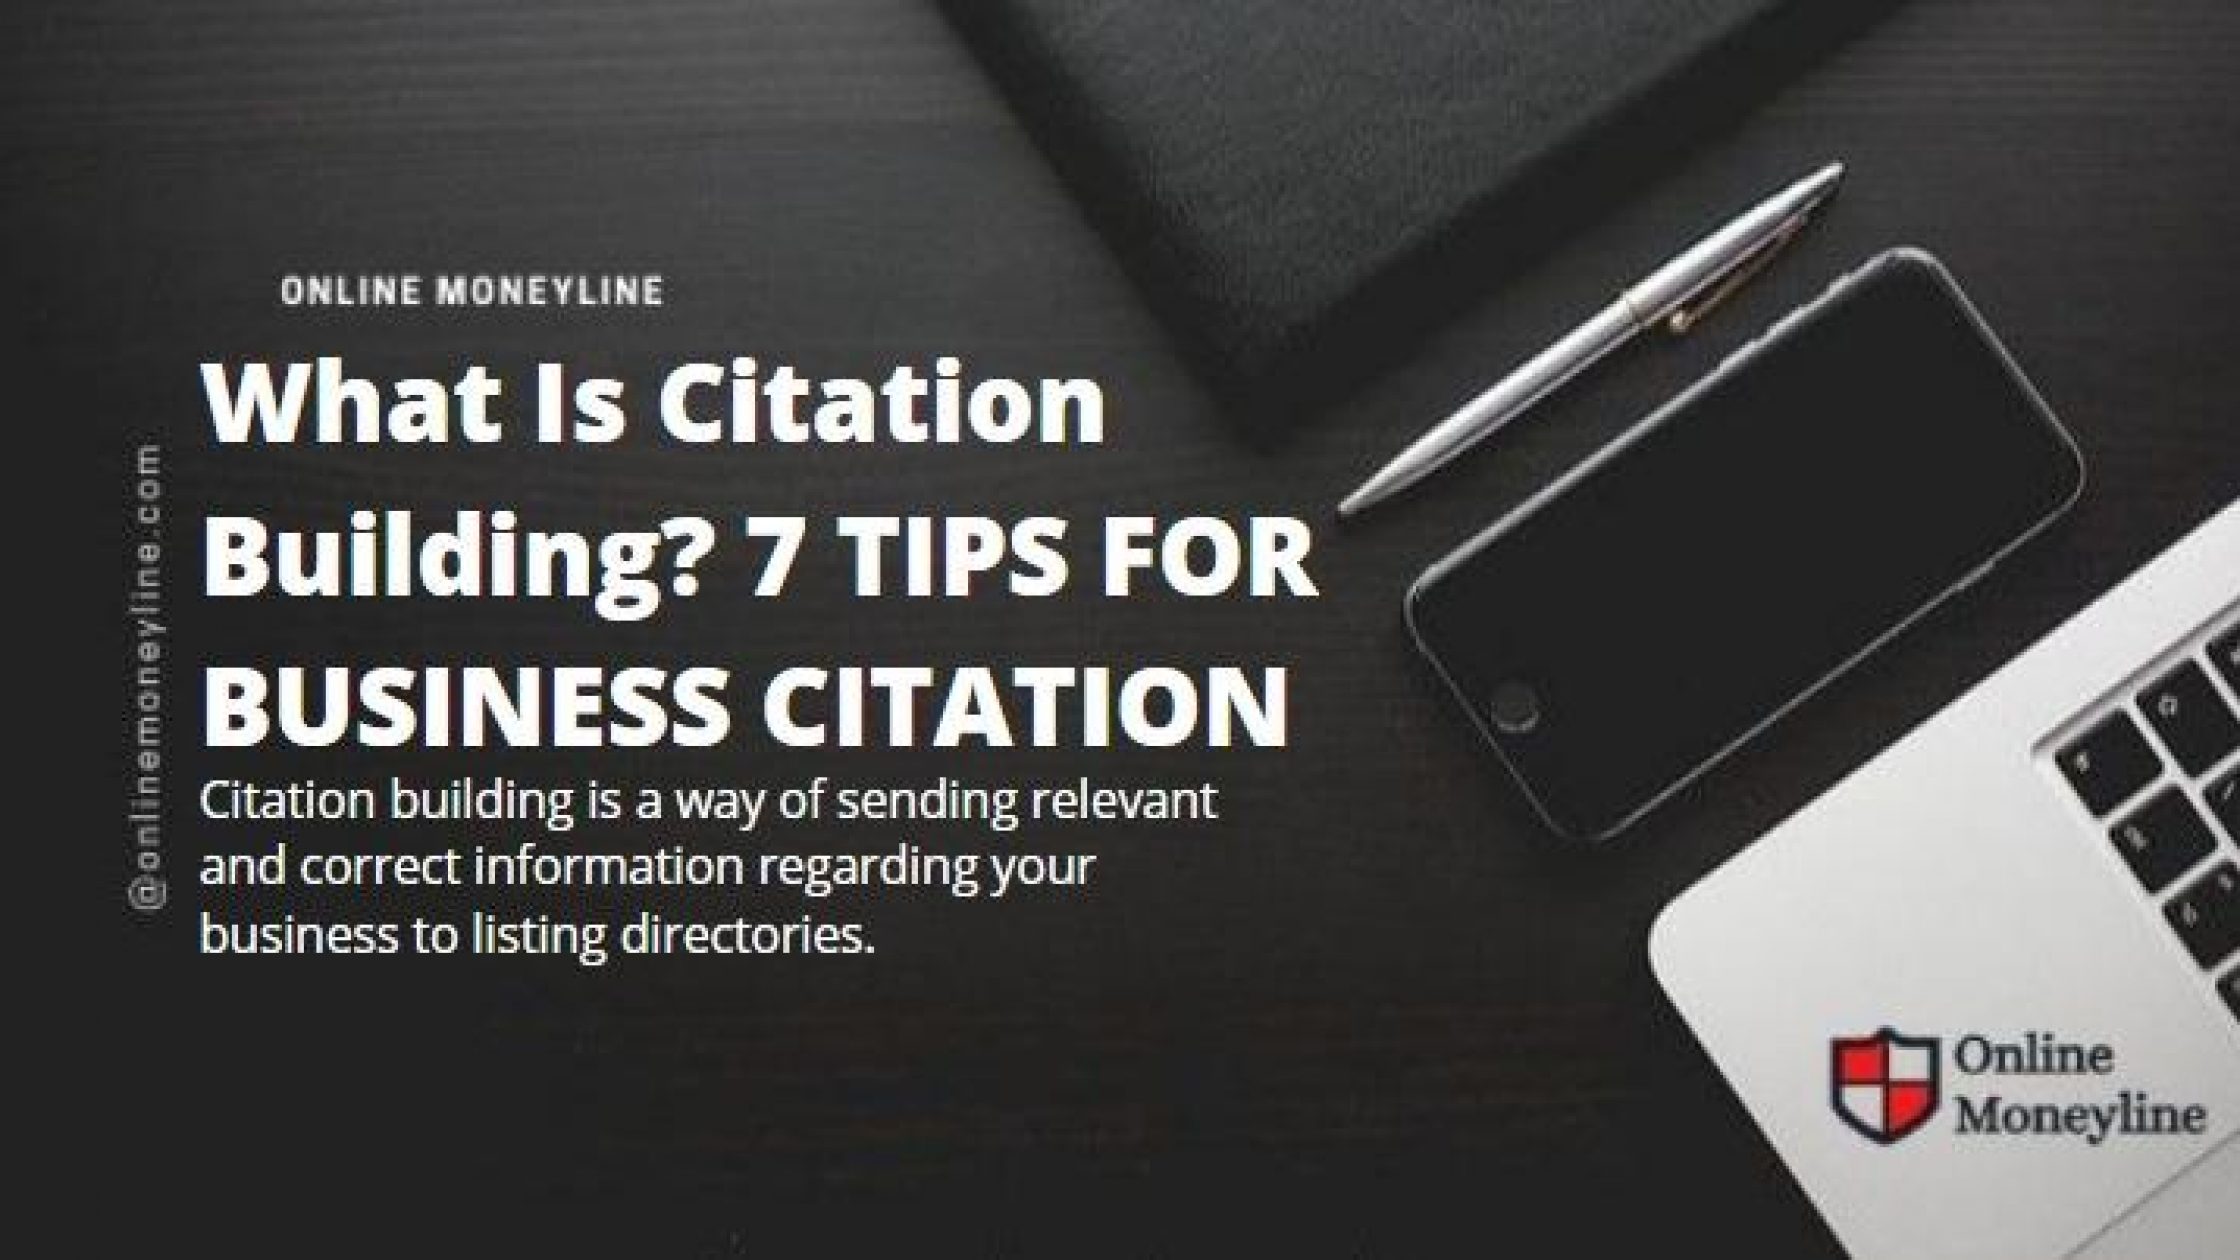 What Is Citation Building? 7 TIPS FOR BUSINESS CITATION